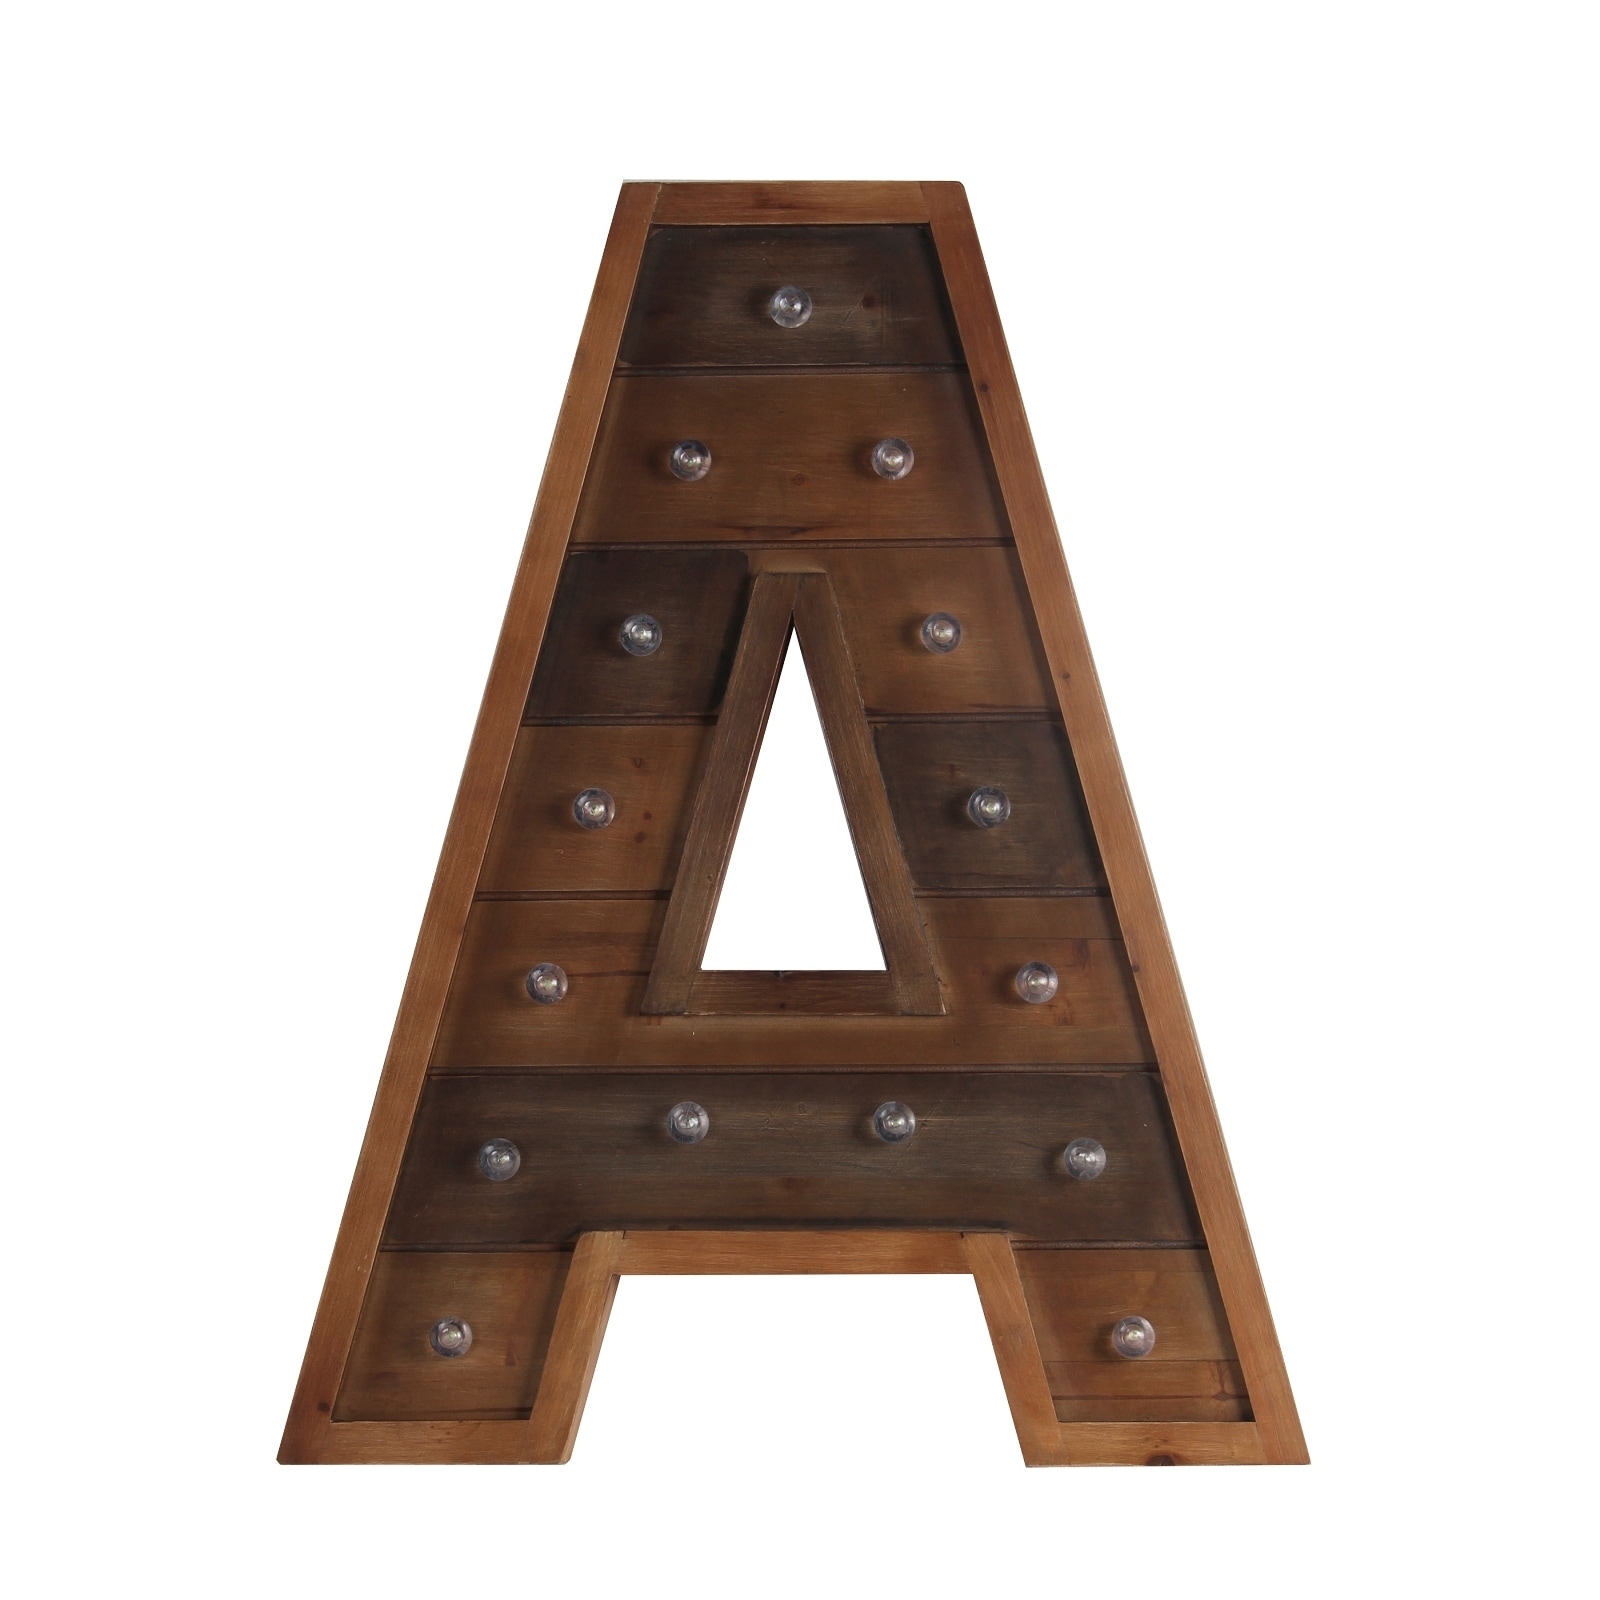 Shop A Wooden Letter board - Free Shipping Today - Overstock - 10149703